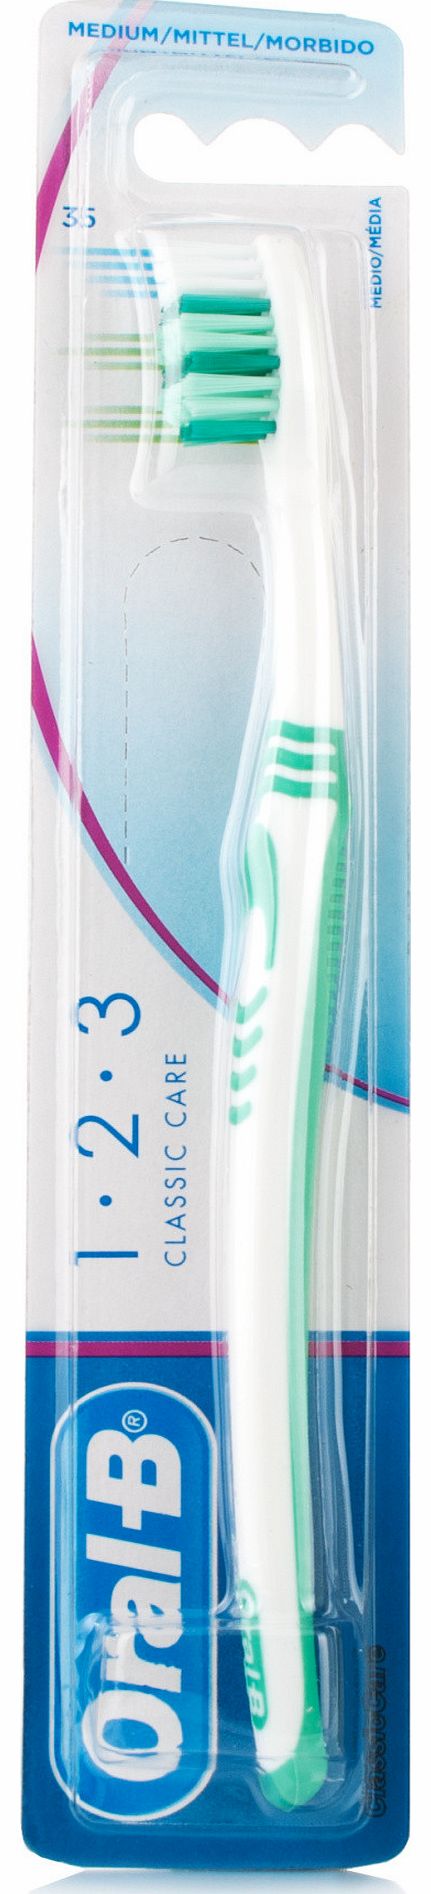 Oral B Classic Med Tooth Brush 35